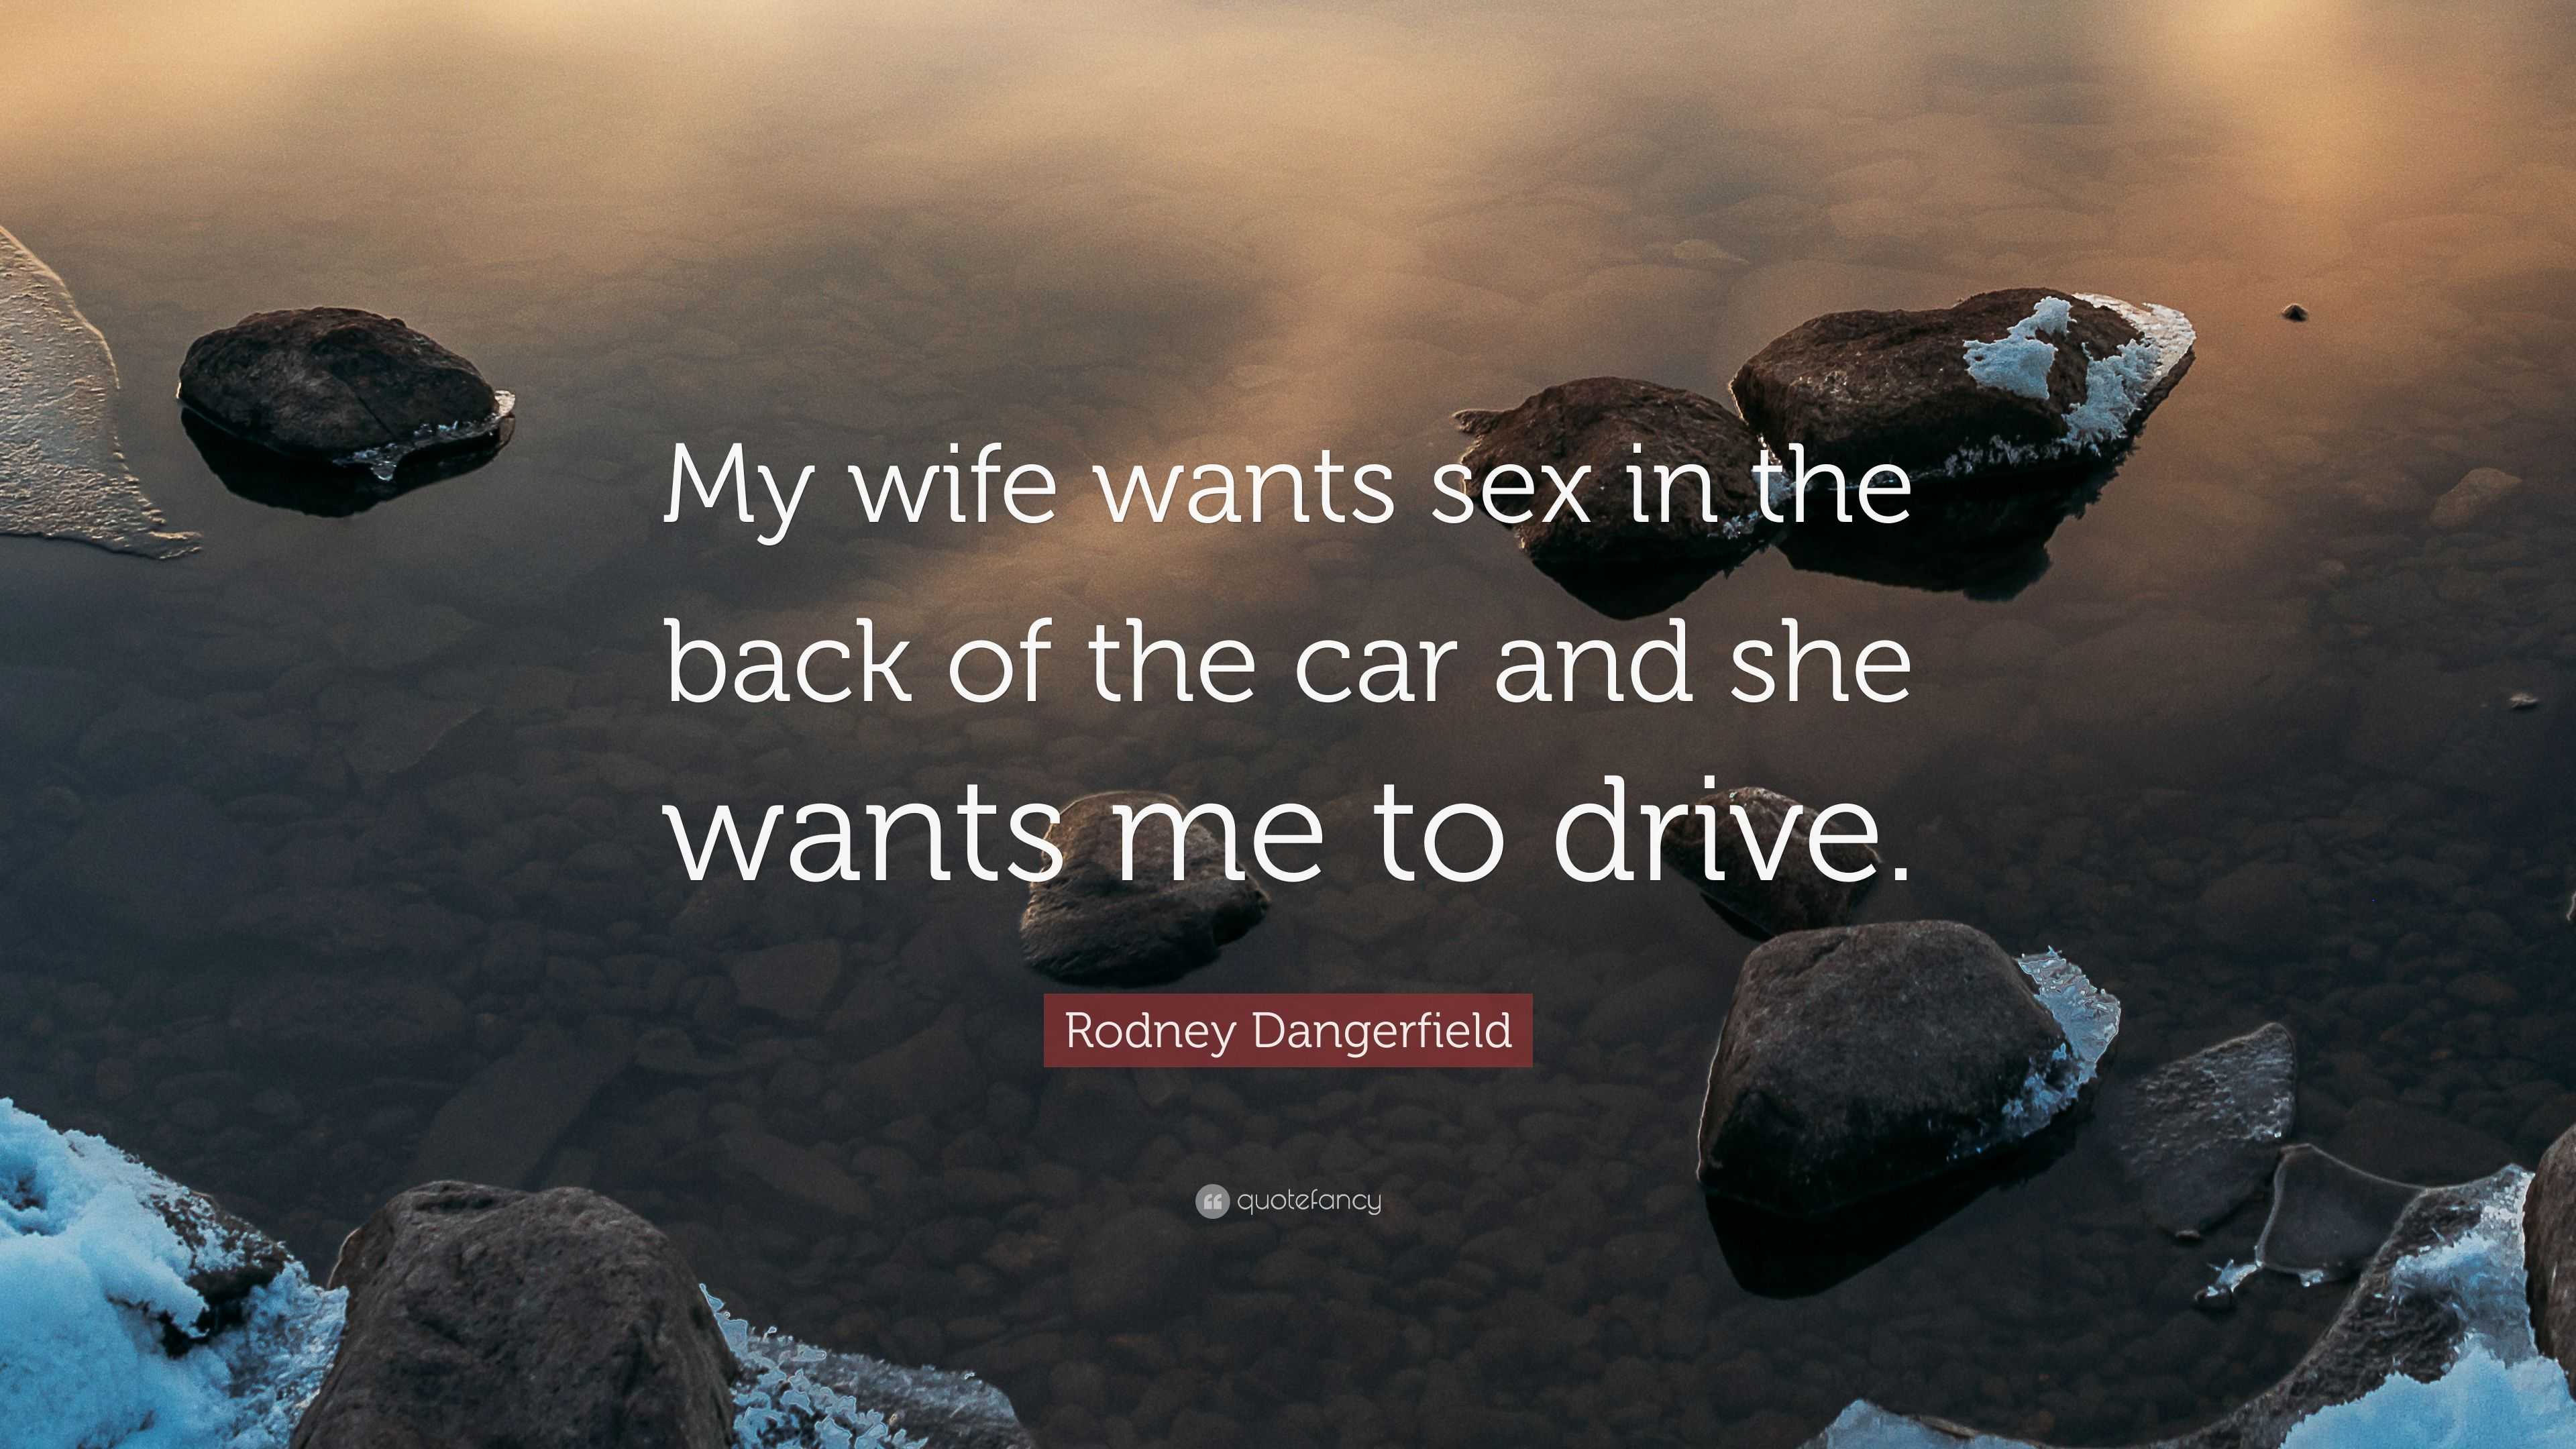 Rodney Dangerfield Quote “My wife wants sex in the back of the car and she wants photo